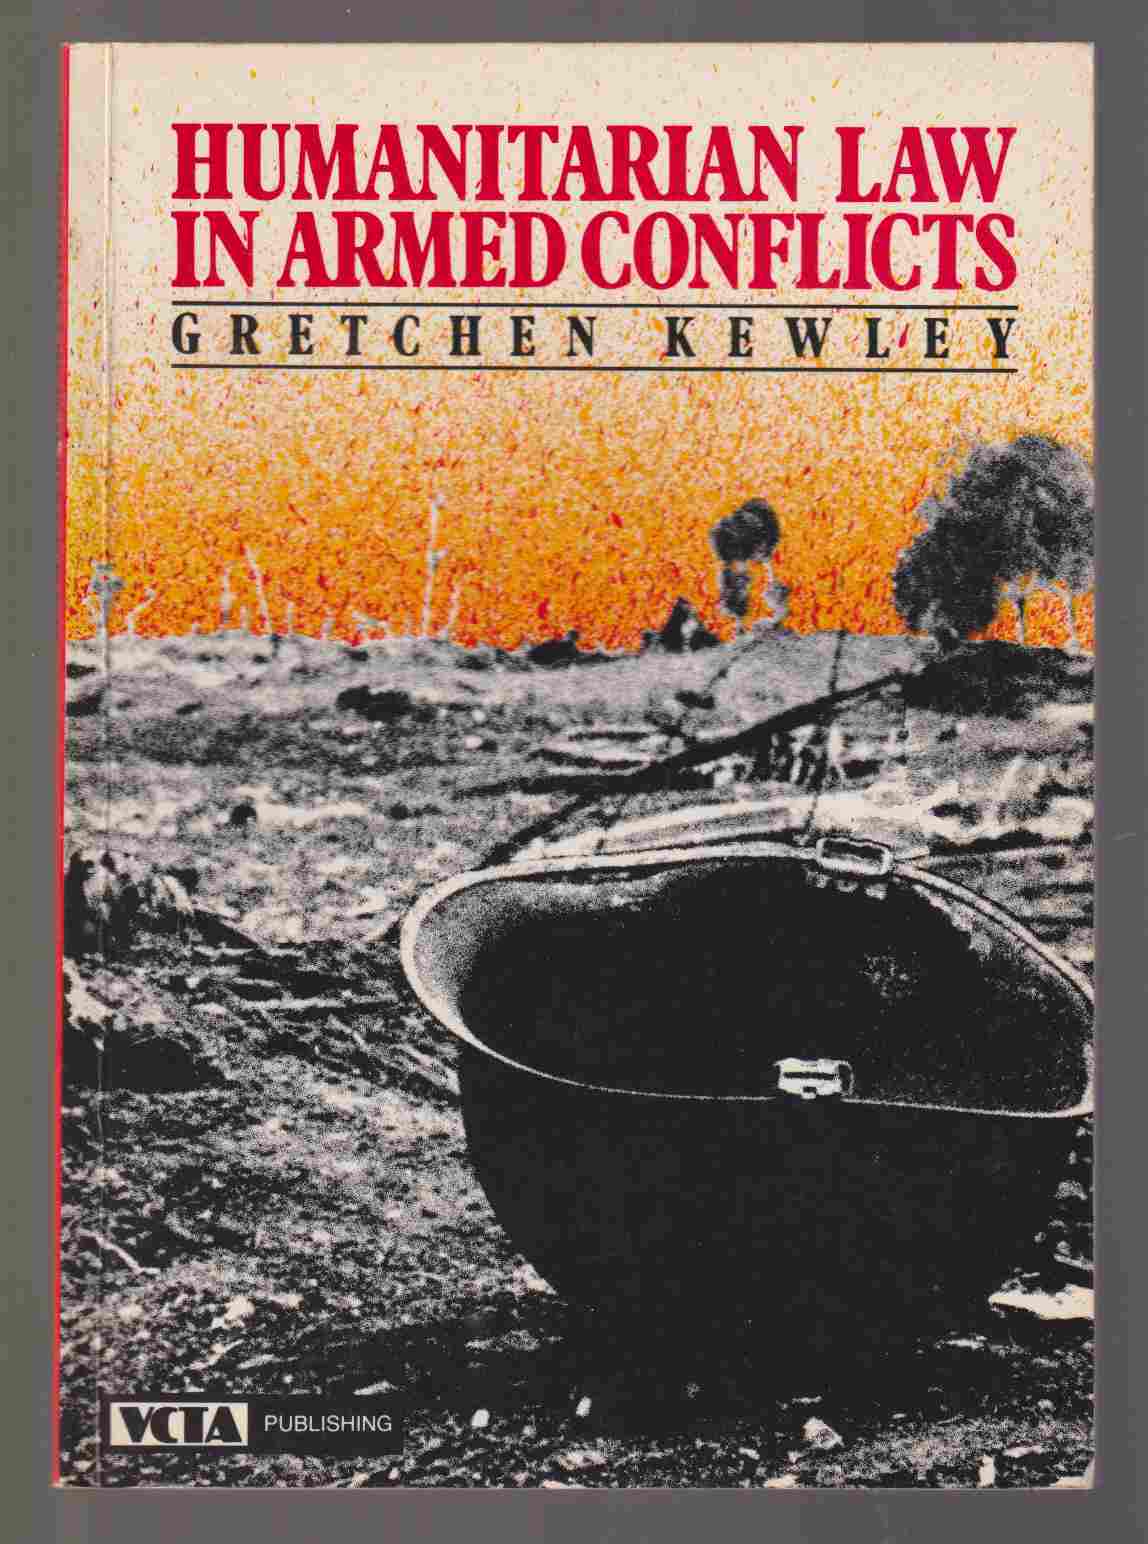 HUMANITARIAN LAW AND HUMAN RIGHTS, IN REFLECTION ON LAW AND ARMED CONFLICTS,